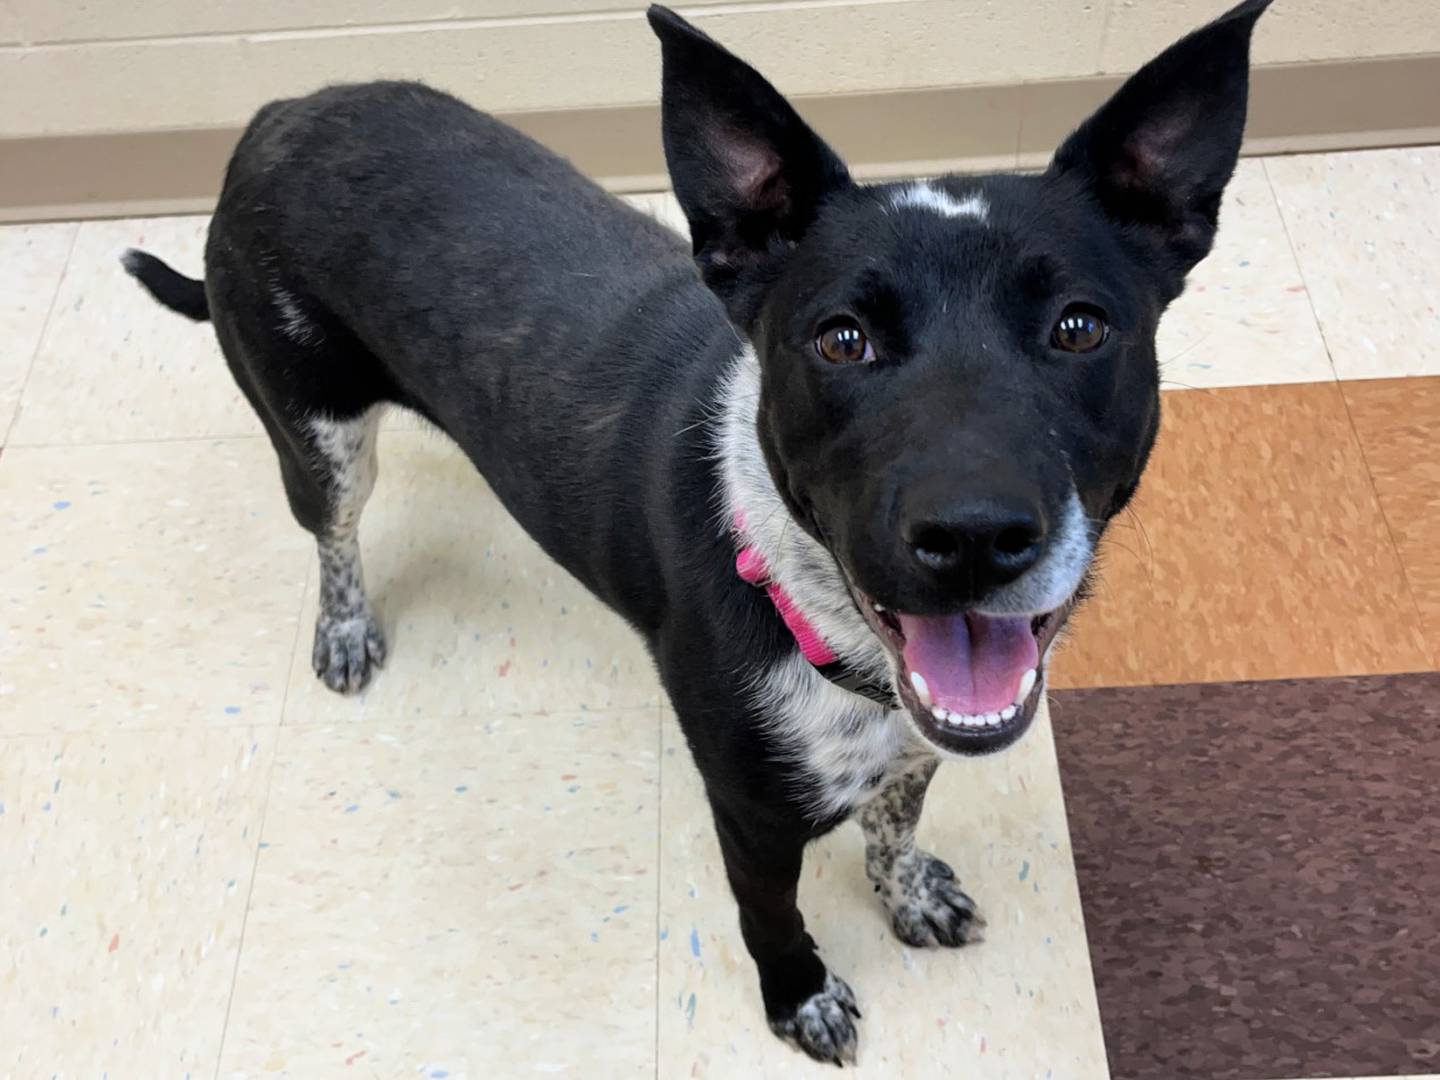 Nova is a spunky 1-year-old Australian cattle dog that loves people and wants to play, play, play. Nova needs an active family to take her on lots of walks and runs through the neighborhood. To meet Nova, call Joliet Township Animal Control at 815-725-0333.